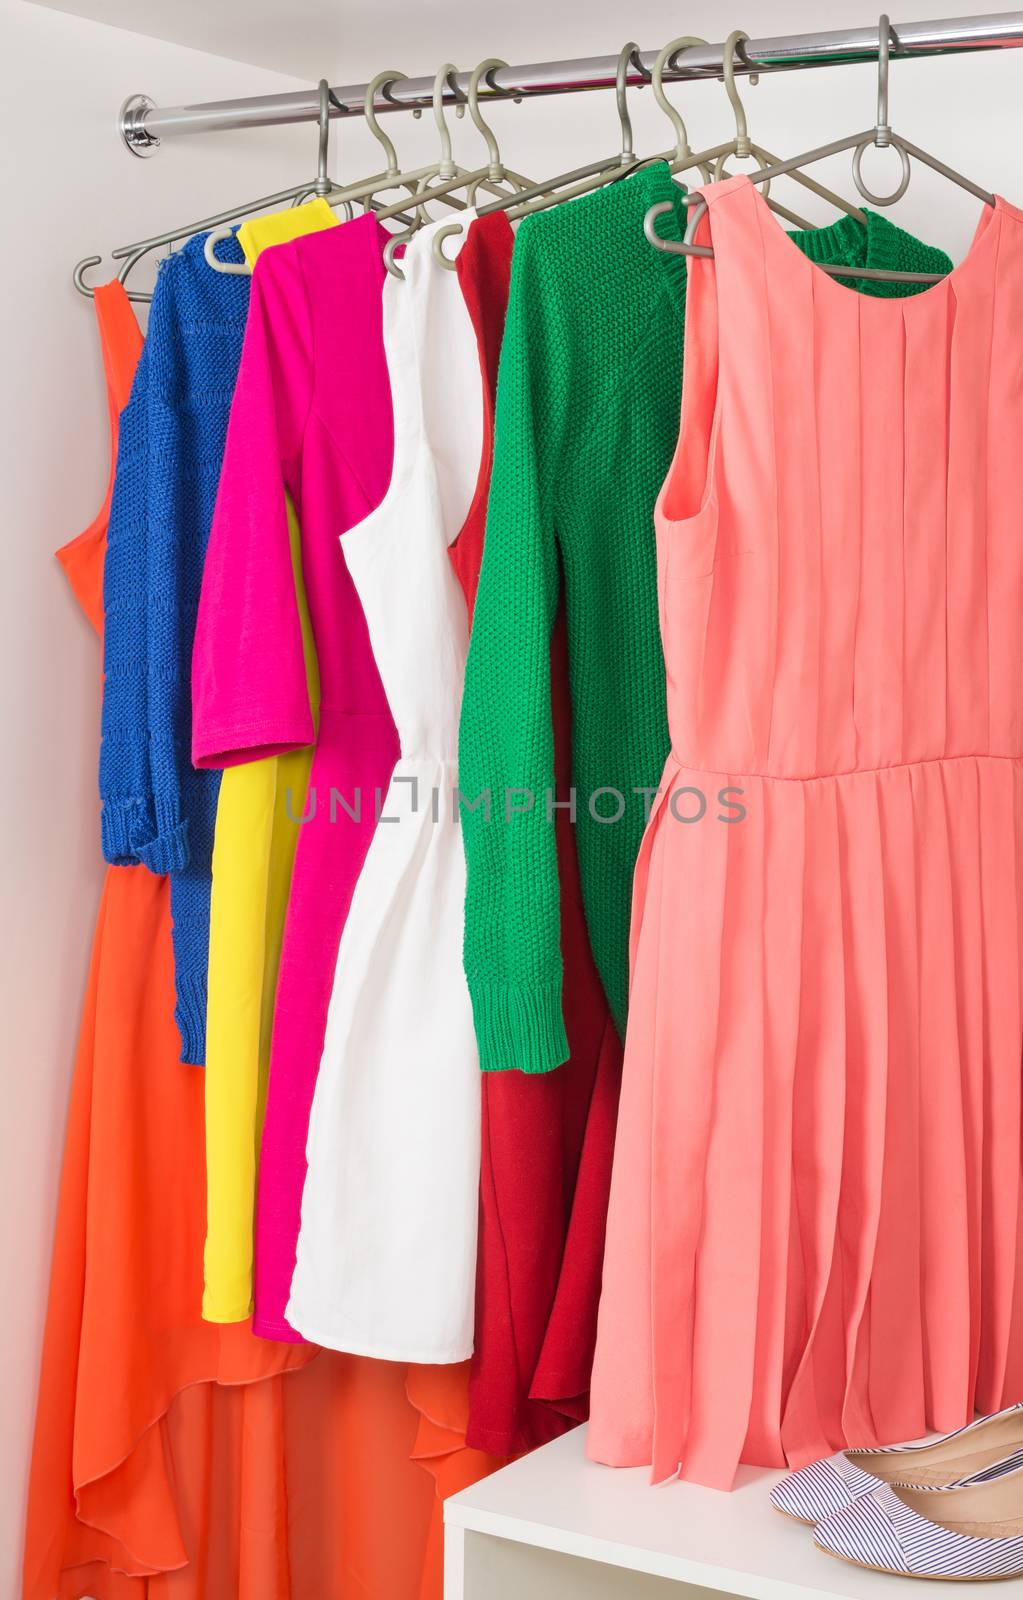 bright colorful female dresses and sweaters  hanging on coat hanger,  shoes and handbag in white wardrobe